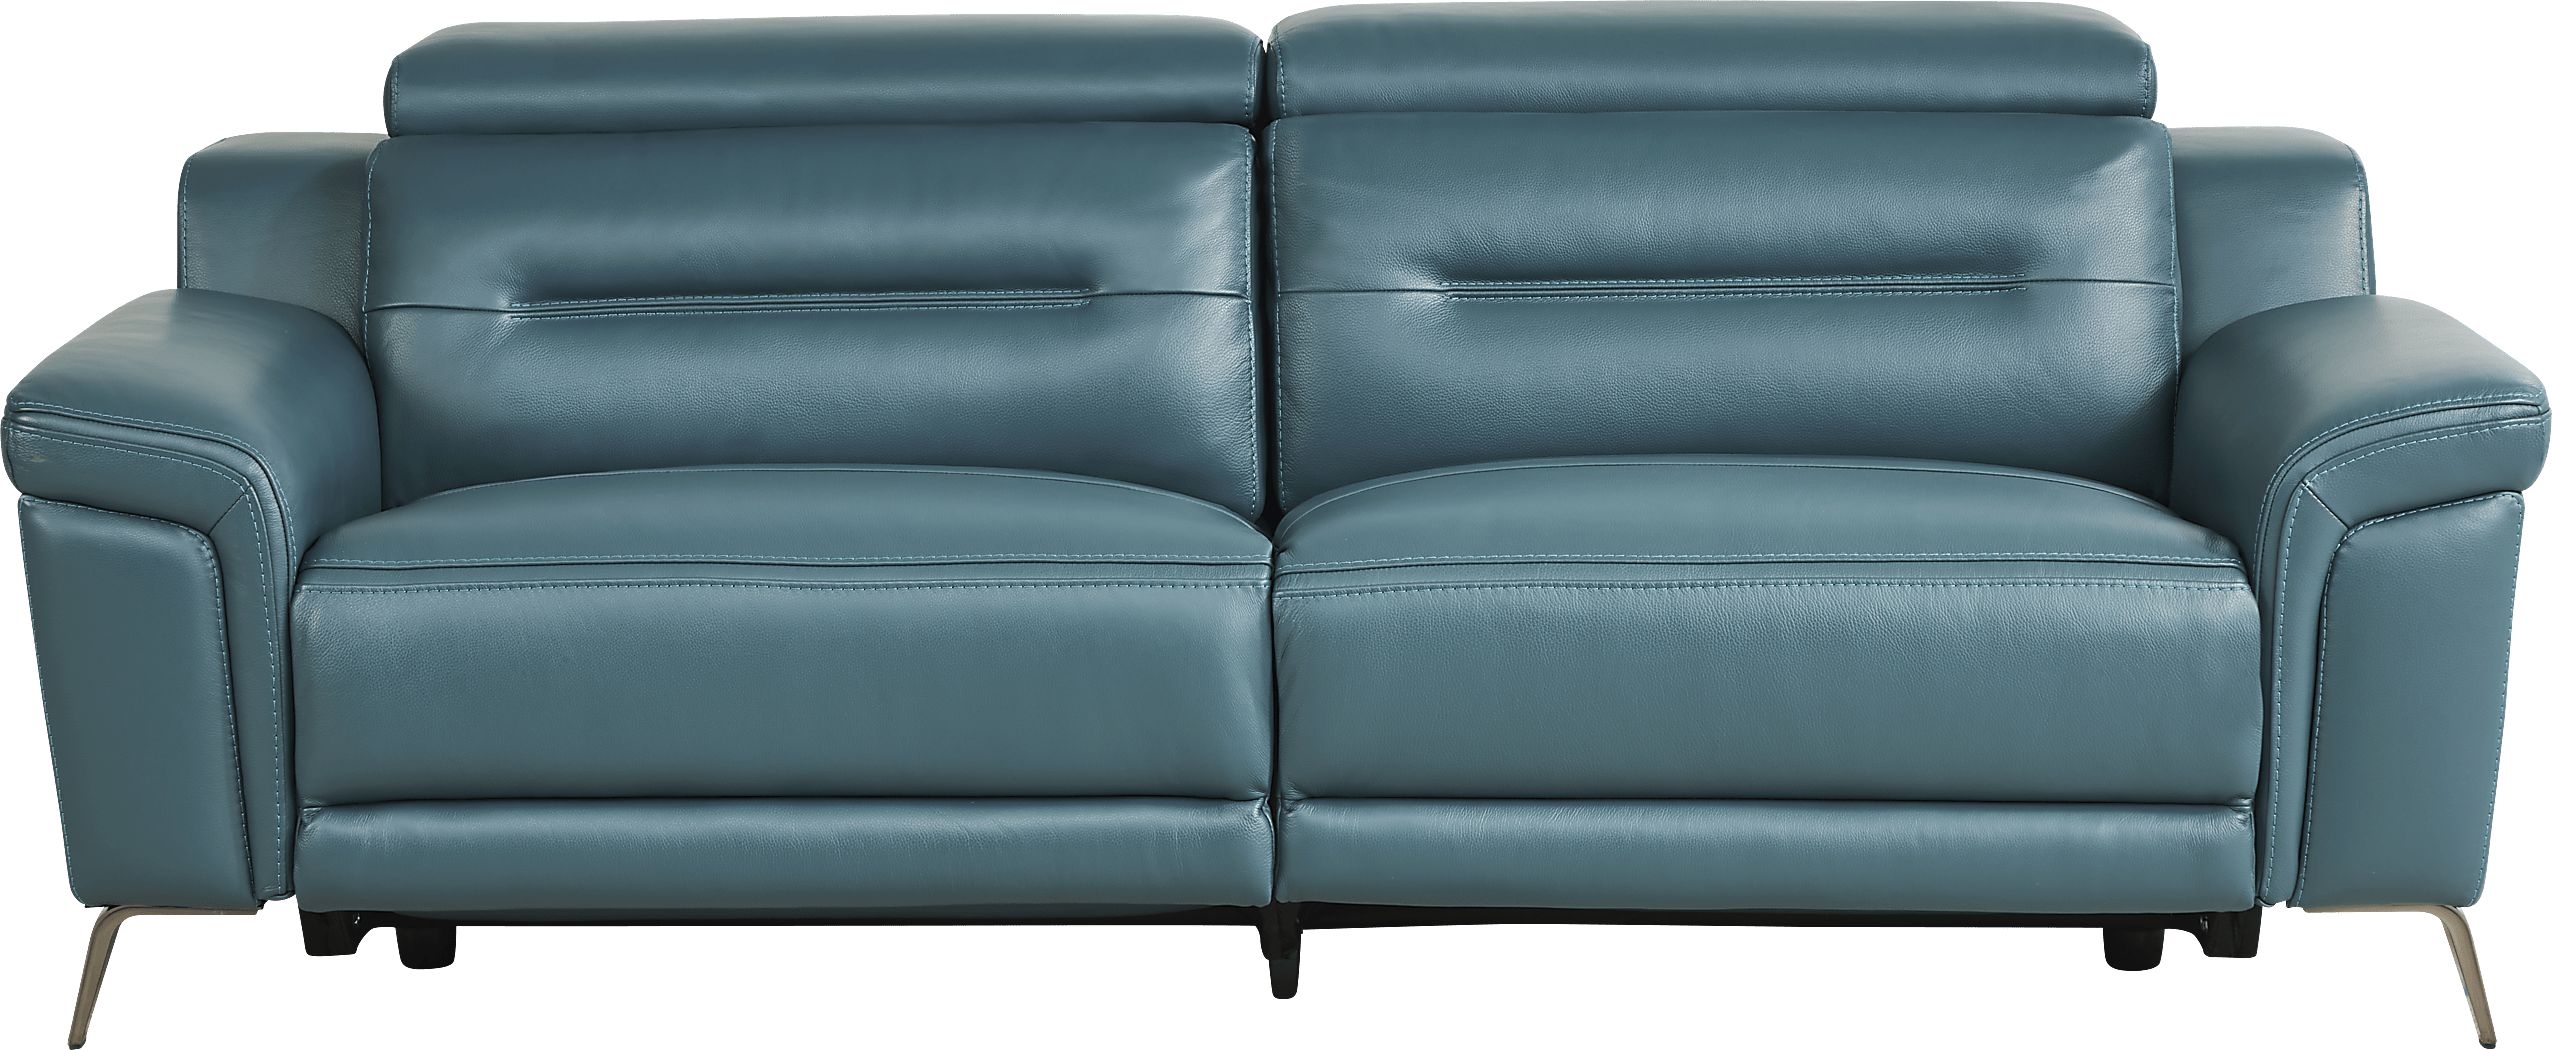 Castella Teal Blue Green Leather Dual Power Reclining Sofa Rooms To Go